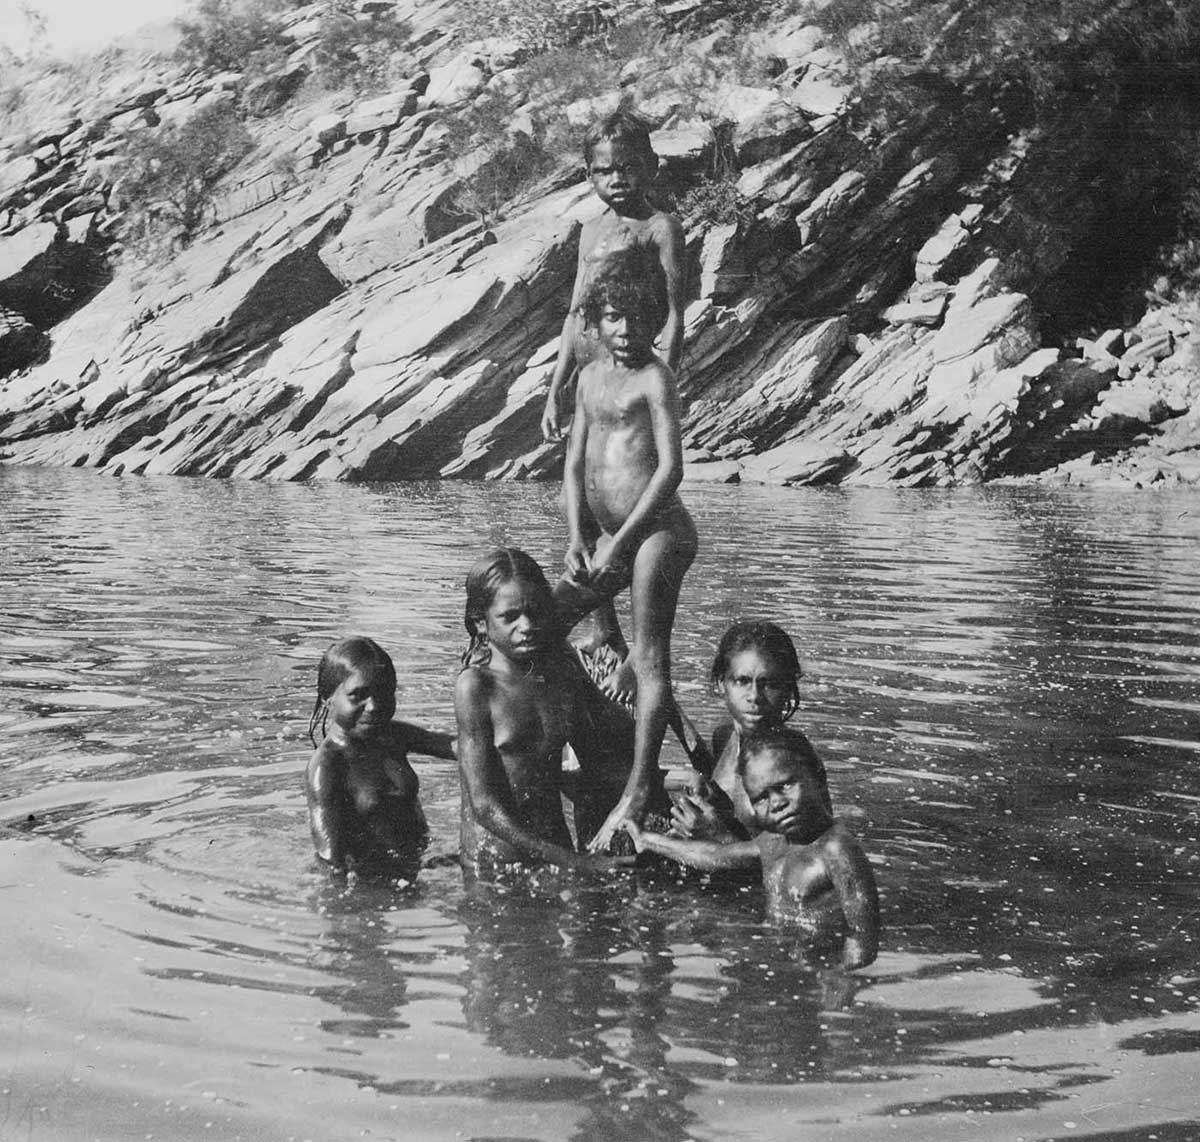 Aboriginal children in a rock pool, Sunday Island, Western Australia, 1916. The six children are on and around a partially submerged mangrove stump. Two of the children stand out of the water on the stump. The rest are visible from about their waists up. The water is rippling in concentric circles around the children. In the background is part of the rock pool bank. It is a rocky slope with large flat weathered sections. Bushes grow in places along the slope. A larger and more dense patch of bush can be seen at the right side of the image. The reflections of the children and bank on the water are broken up by the rippled surface. - click to view larger image